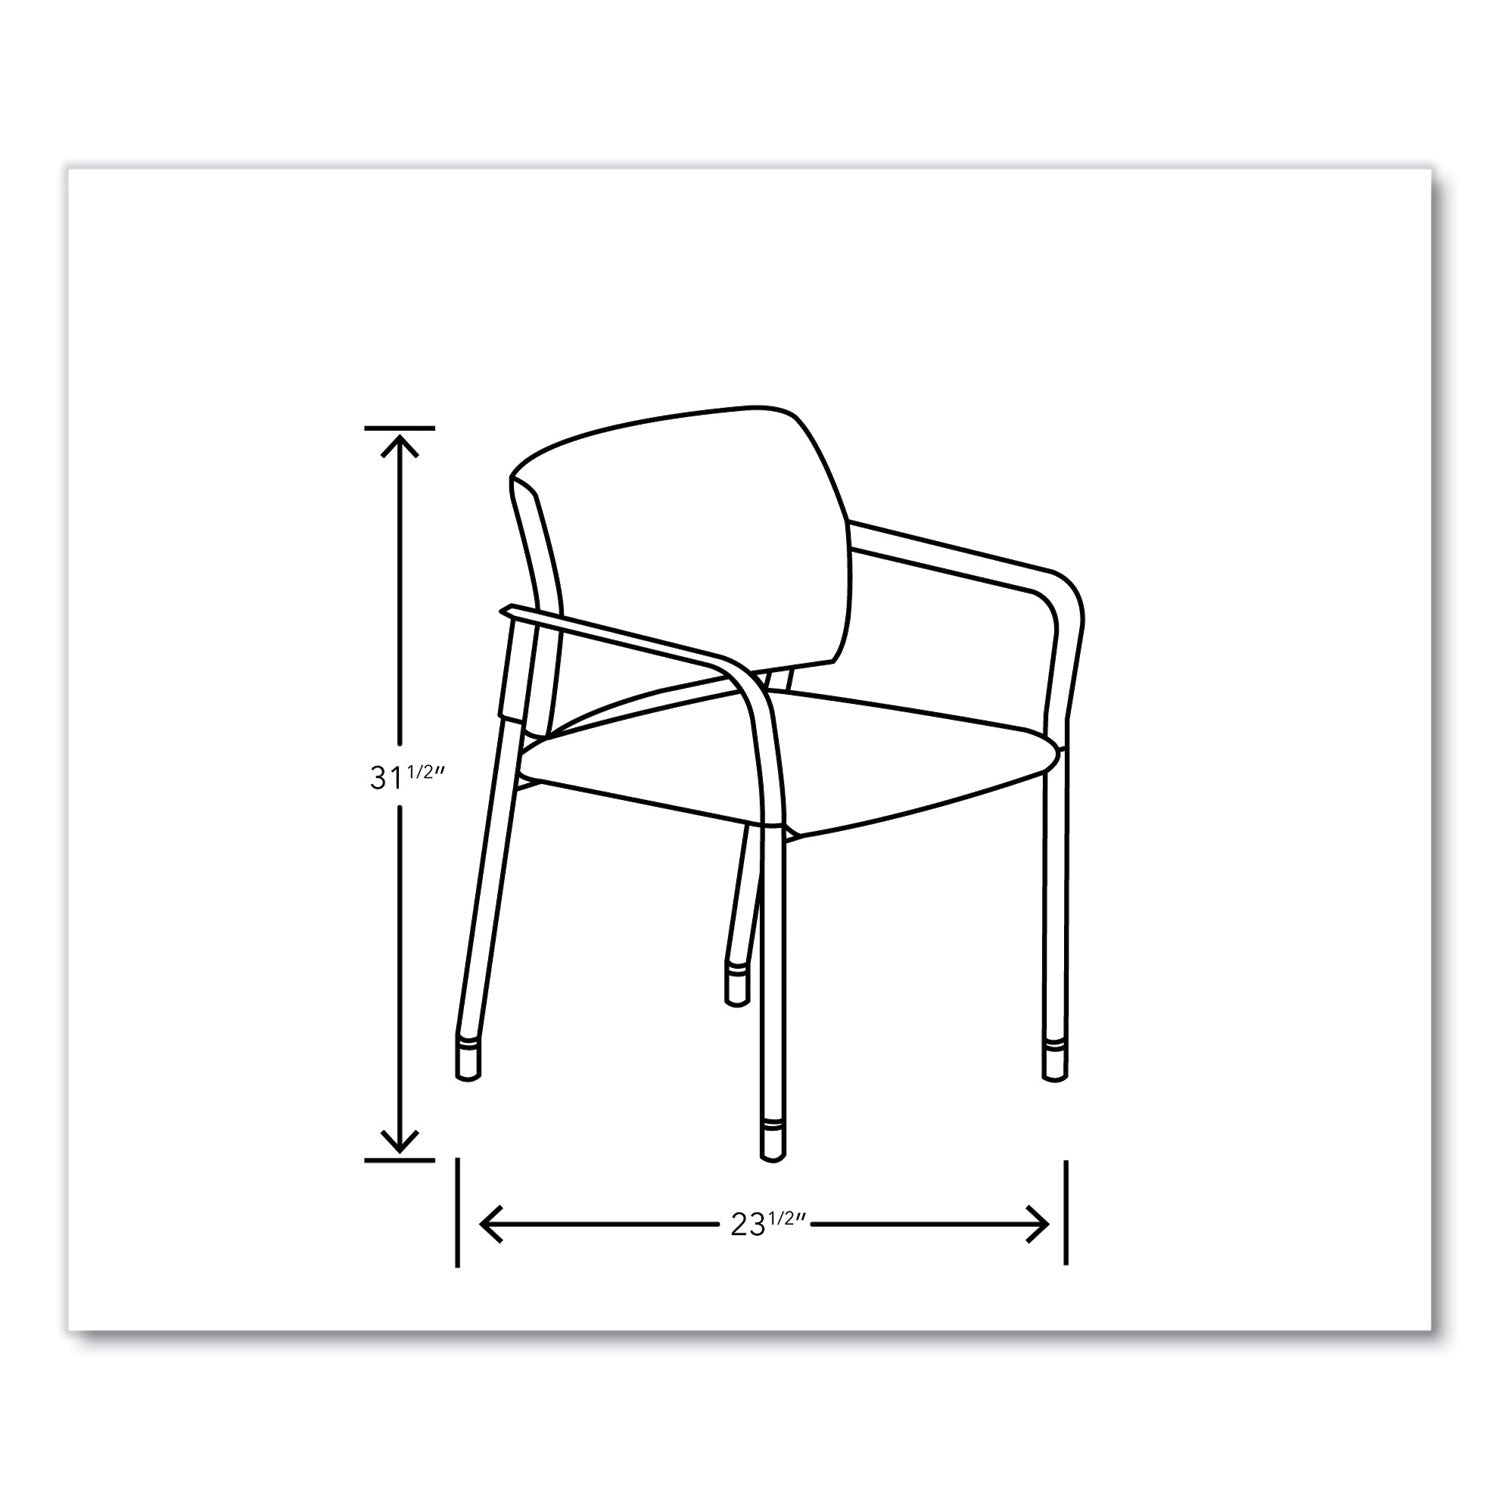 accommodate-series-guest-chair-with-arms-vinyl-upholstery-235-x-2225-x-32-flint-seat-back-charblack-legs-2-carton_honsgs6fbsx39cb - 2